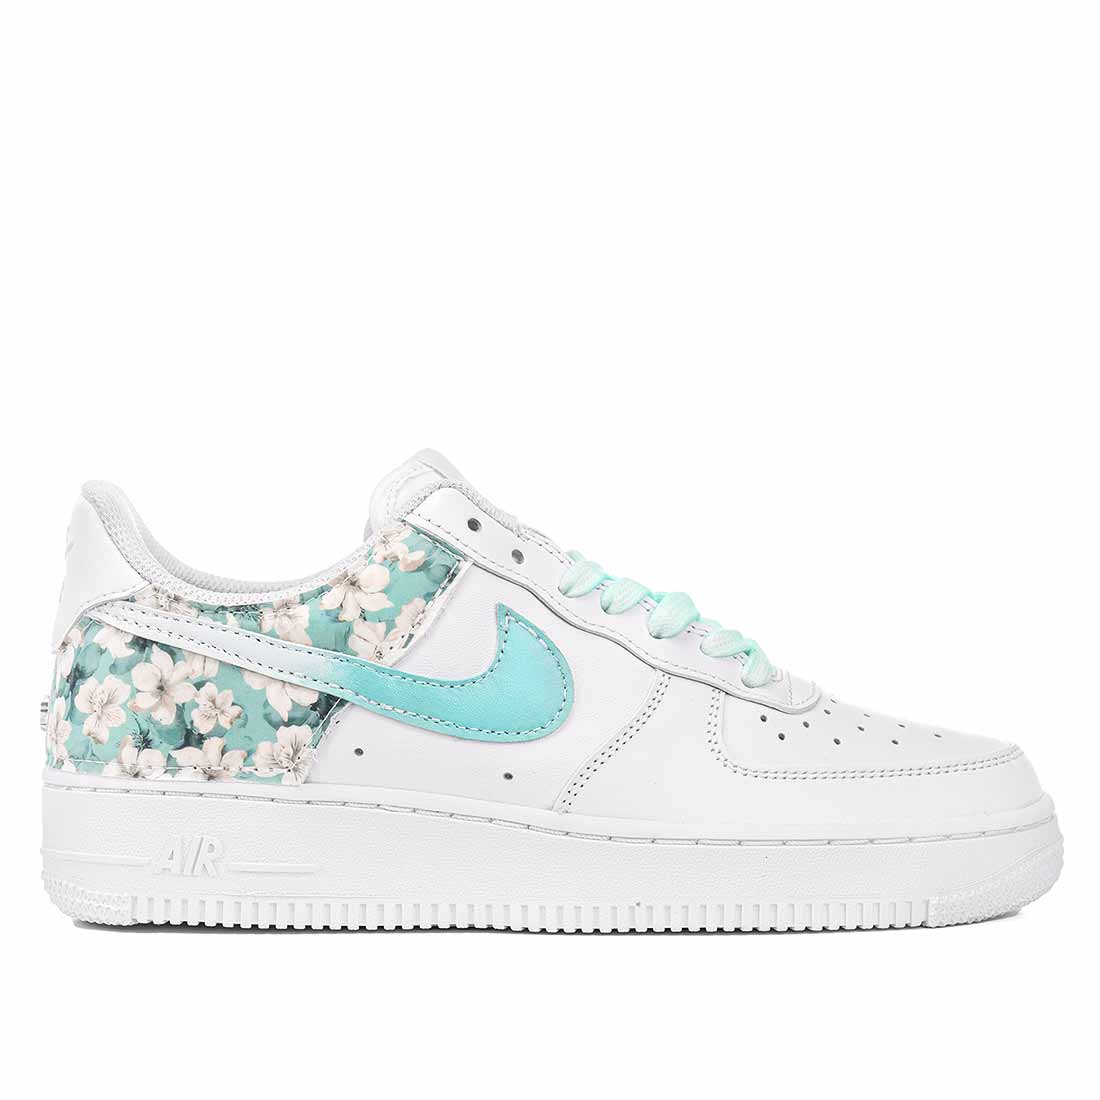 Nike air force one con stampa floreale verde acqua